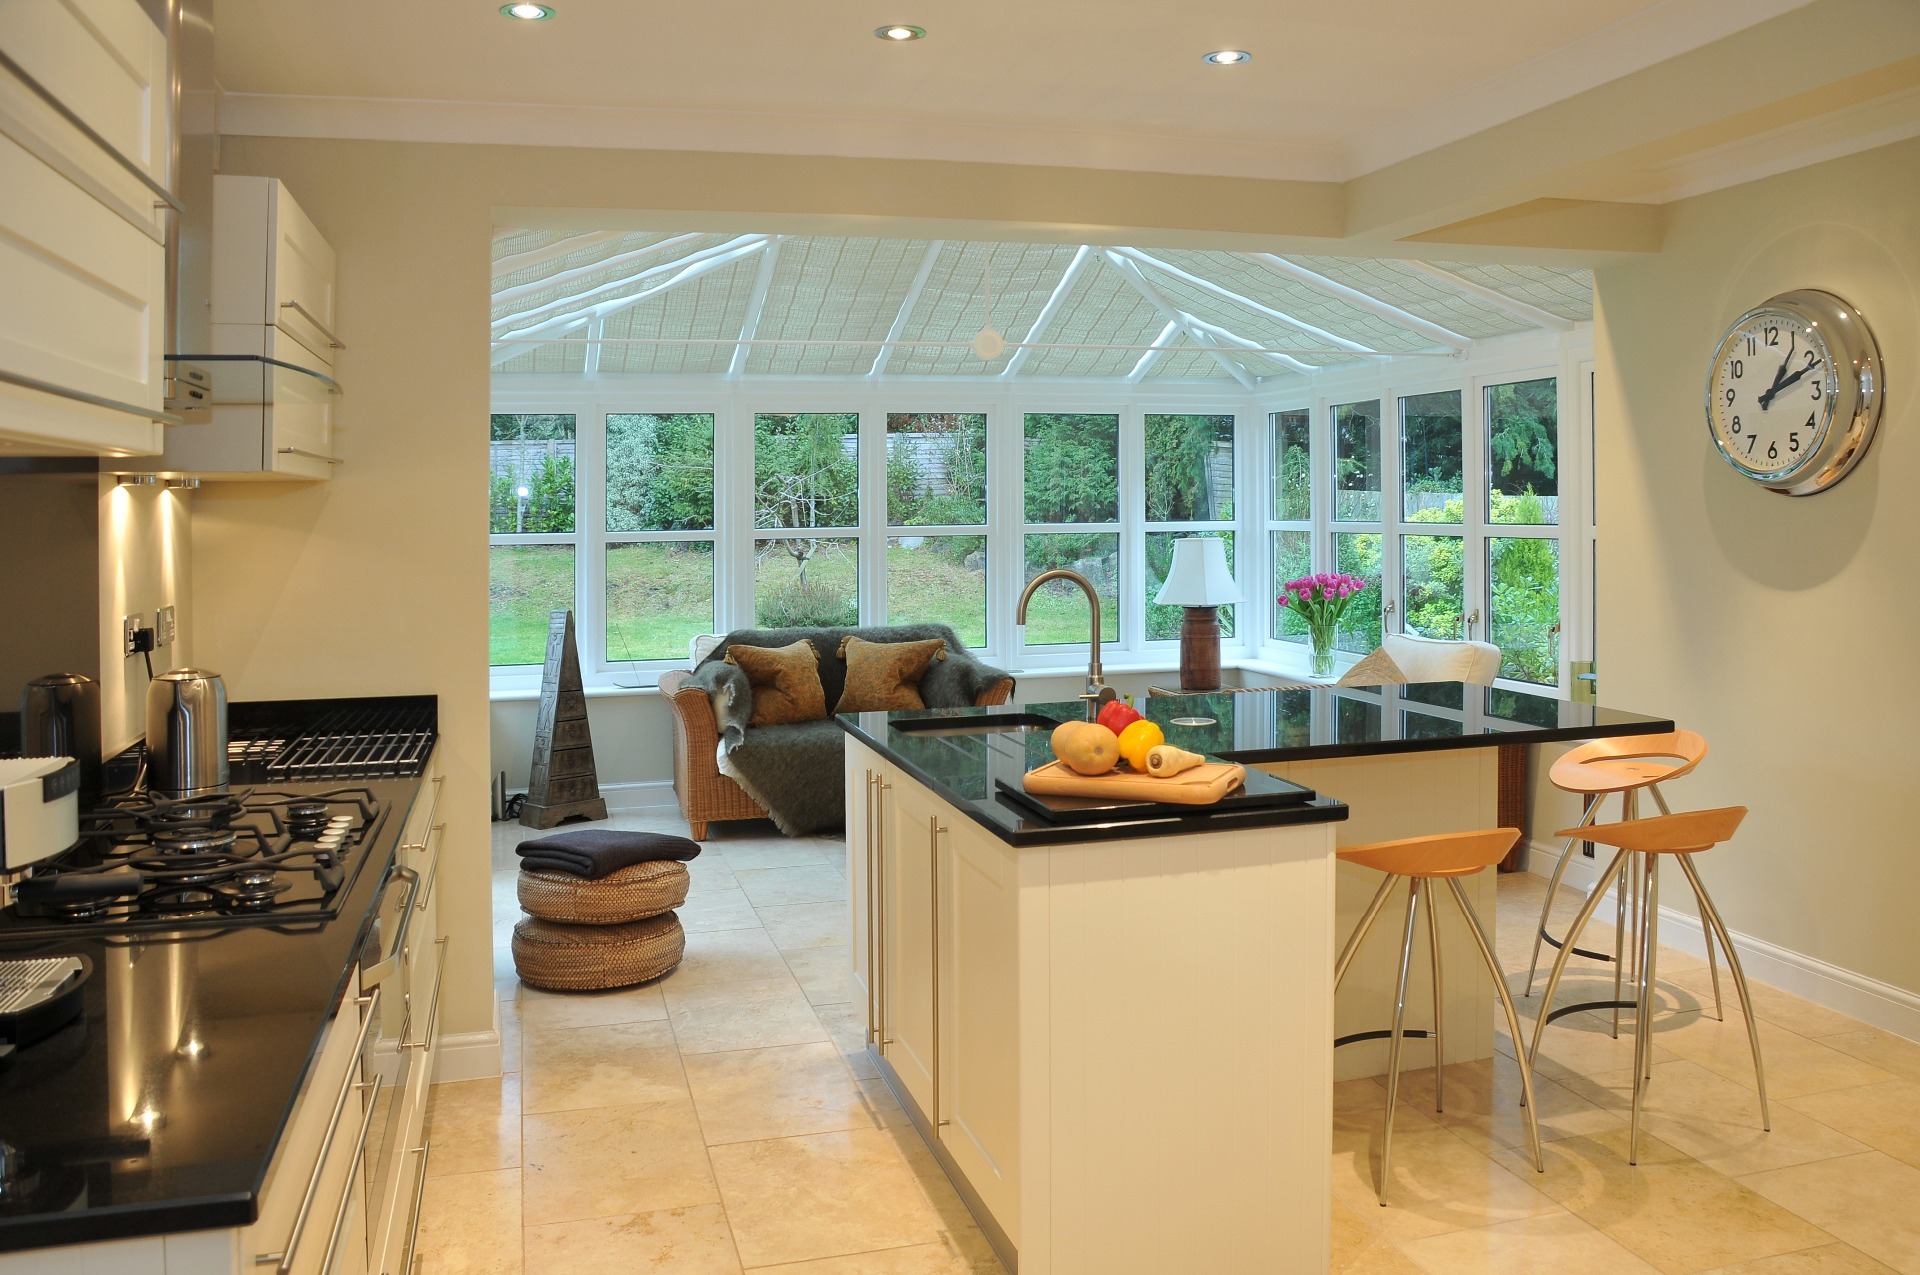 Extend kitchen with a conservatory